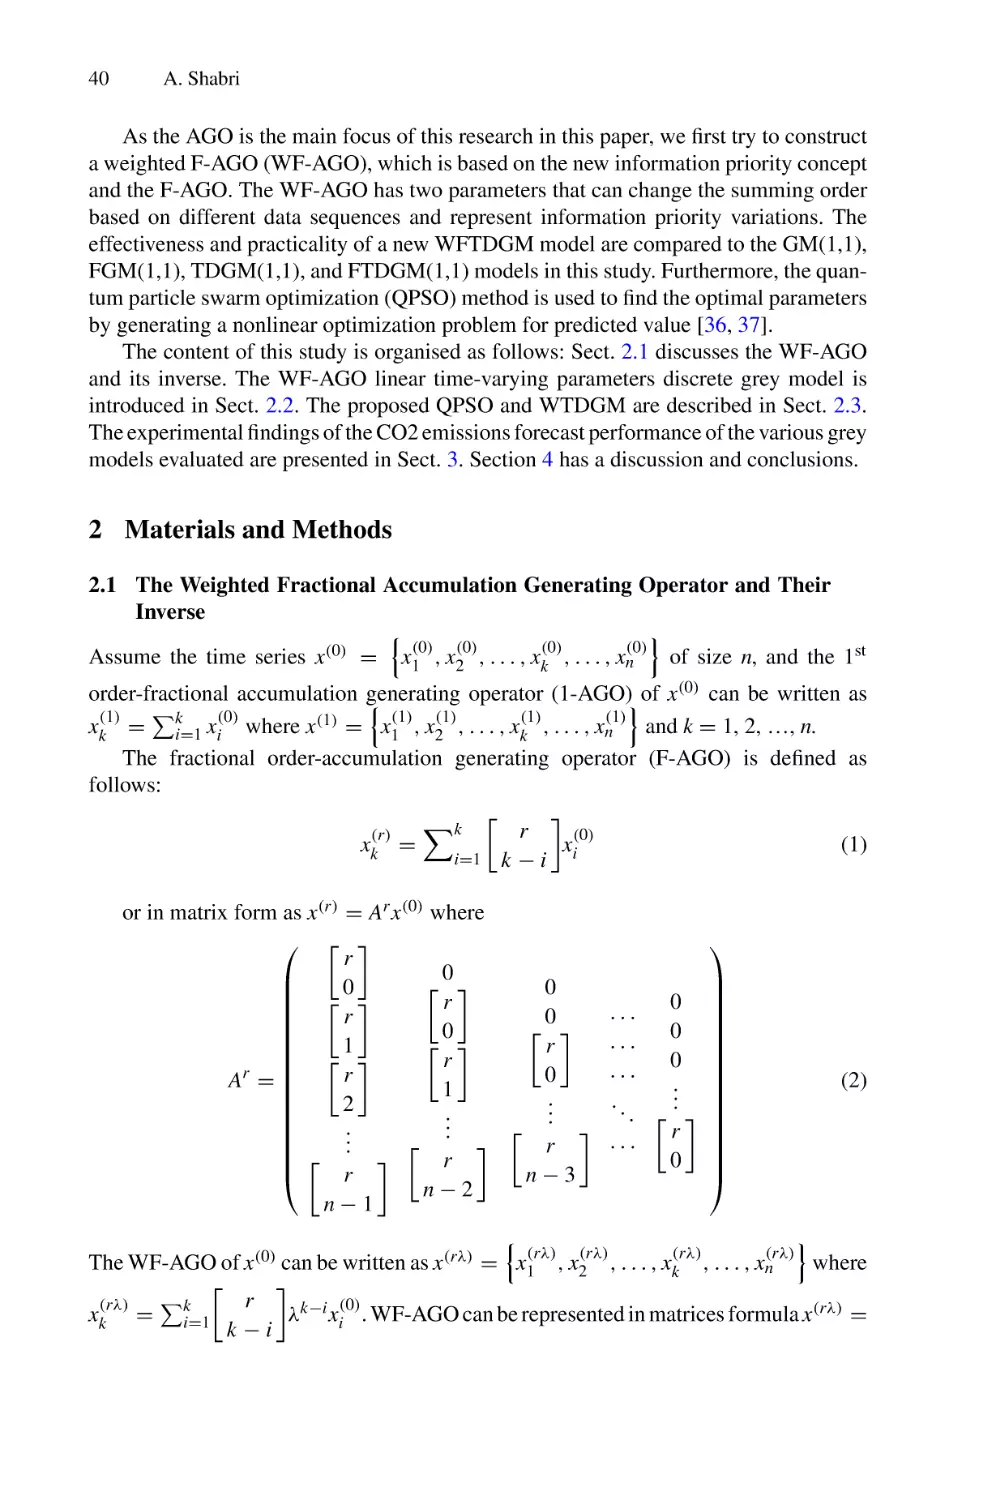 2 Materials and Methods
2.1 The Weighted Fractional Accumulation Generating Operator and Their Inverse